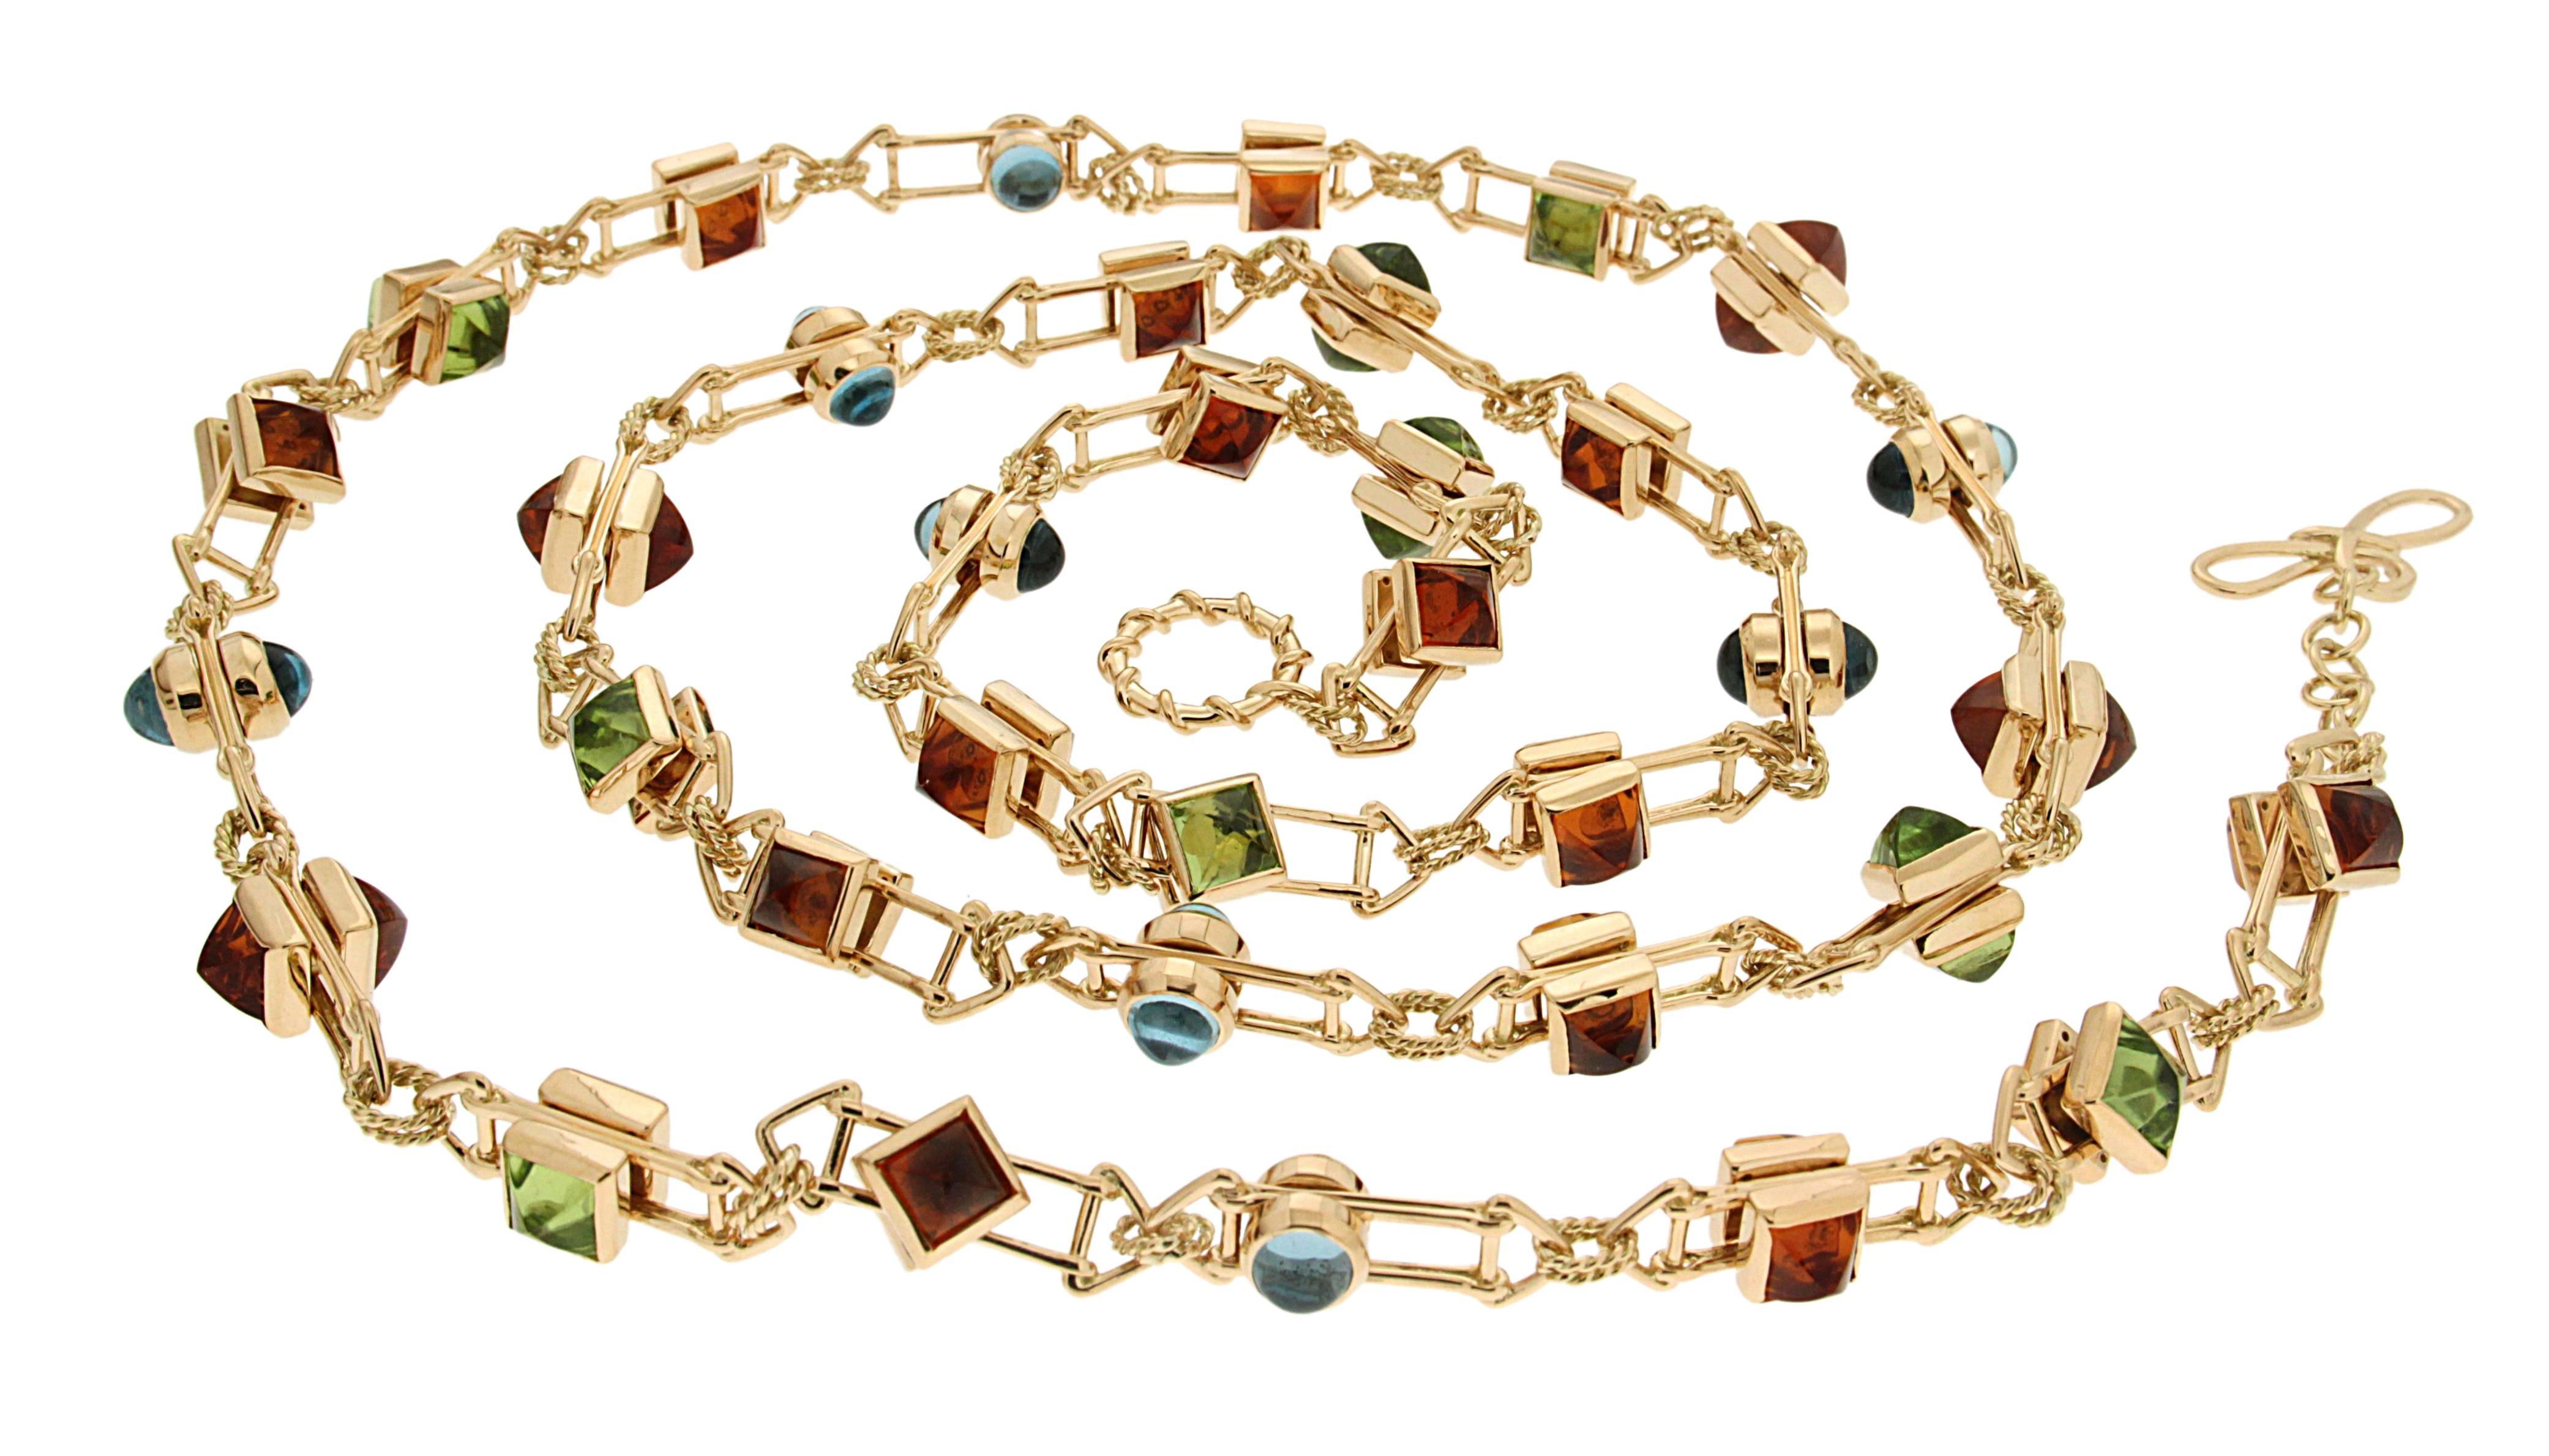 This one of a kind Floating Stone Necklace features special cut squares and rounds of Peridot, Madeira Citrine and Blue Topaz, and is finished in 18kt yellow gold.